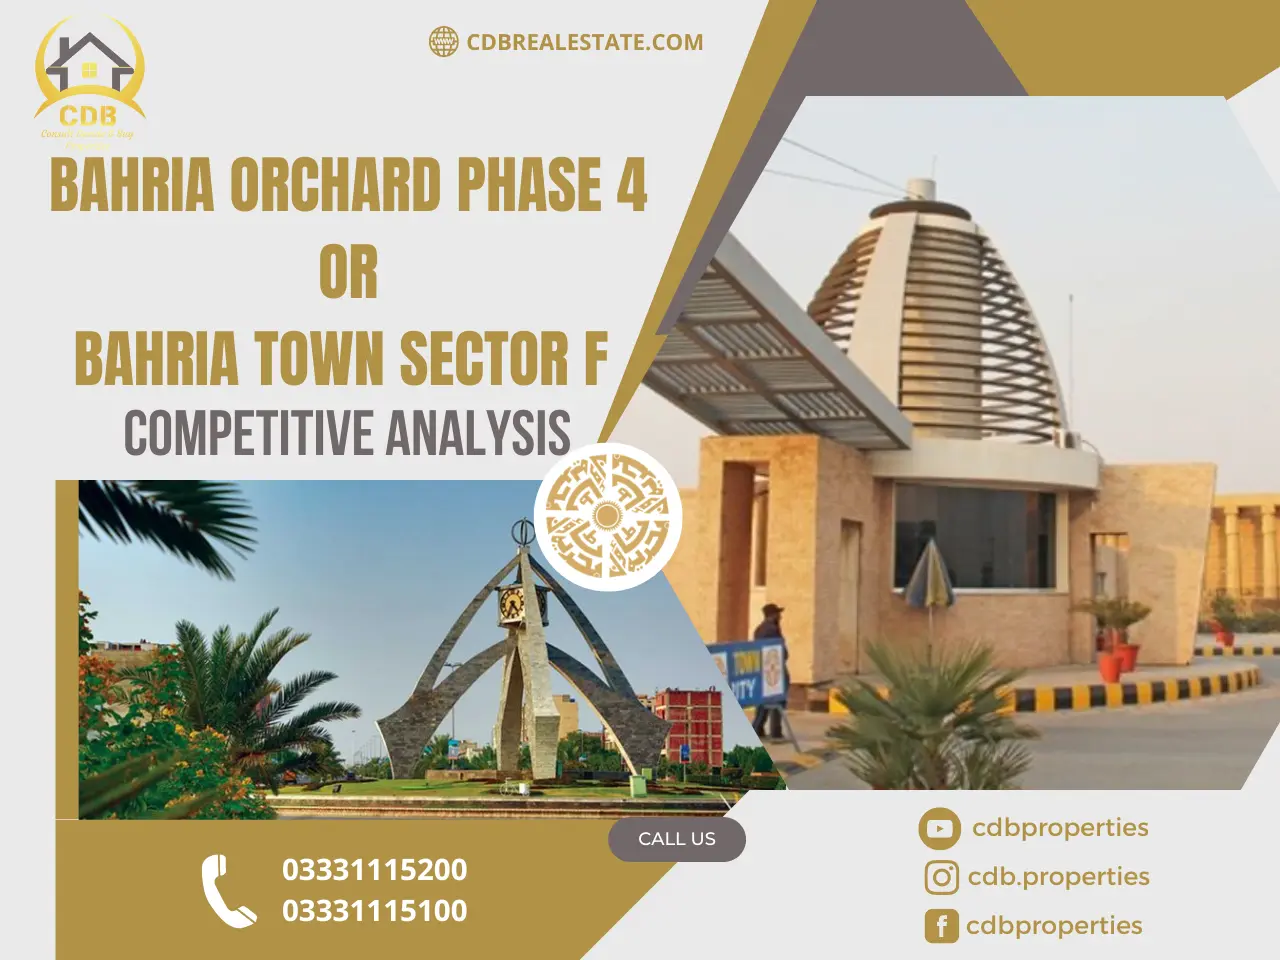 Bahria Orchard Phase 4 OR Bahria Town Sector F